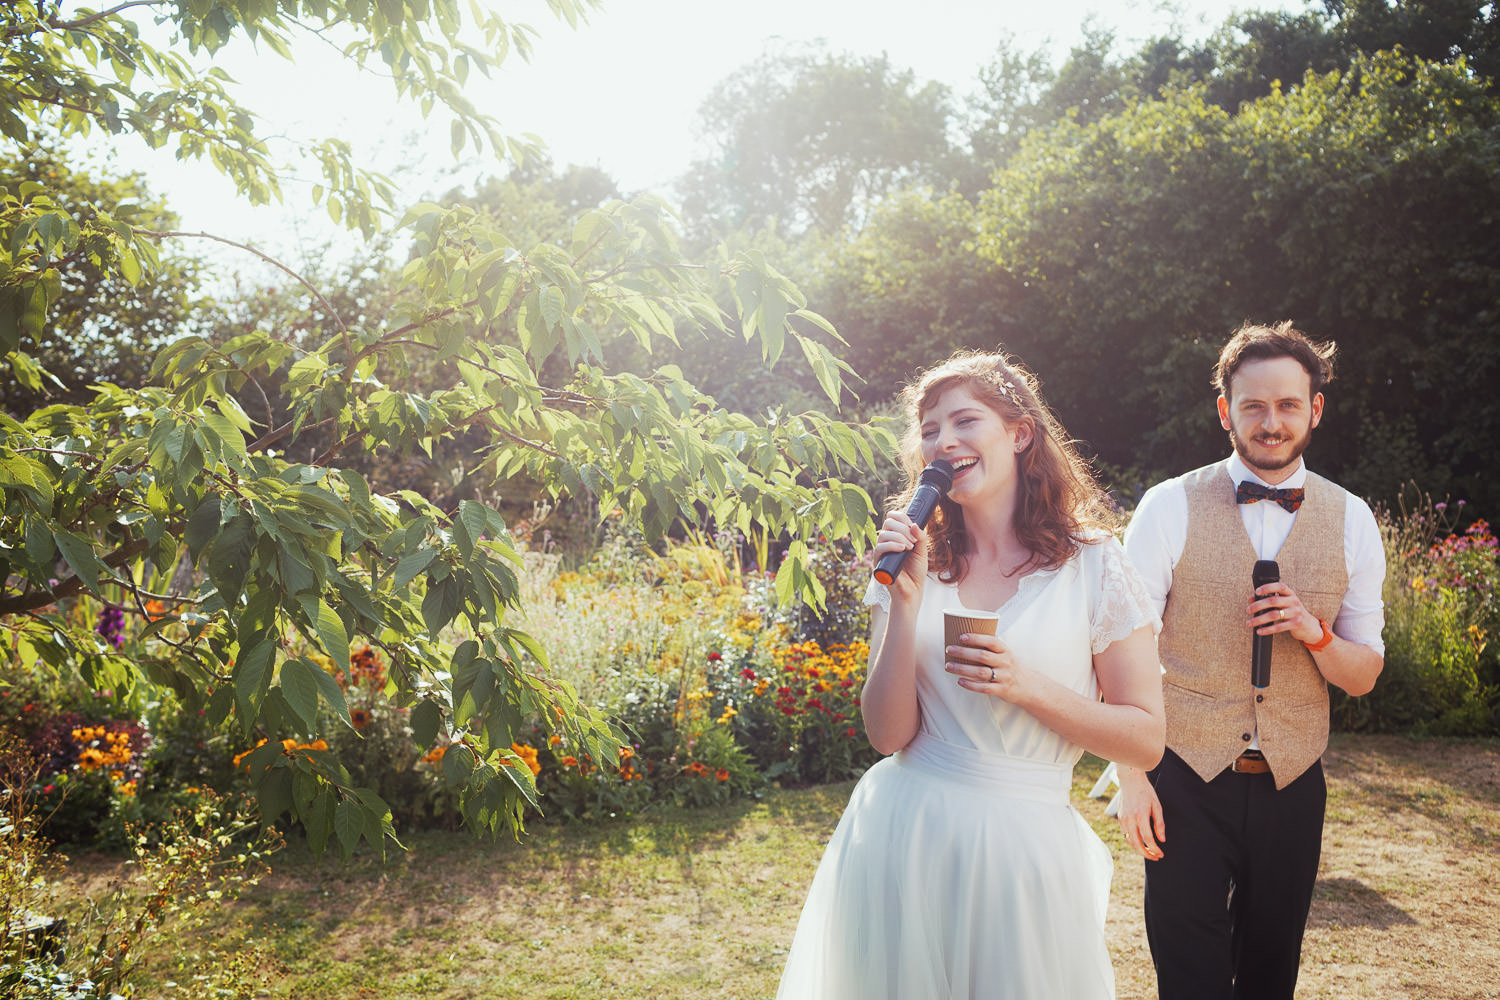 Woman in her homemade wedding dress holds a cup of tea and a microphone, she is giving a speech at her wedding. Her husband is stood just behind her. They are in a sunny garden full of yellow and red flowers.